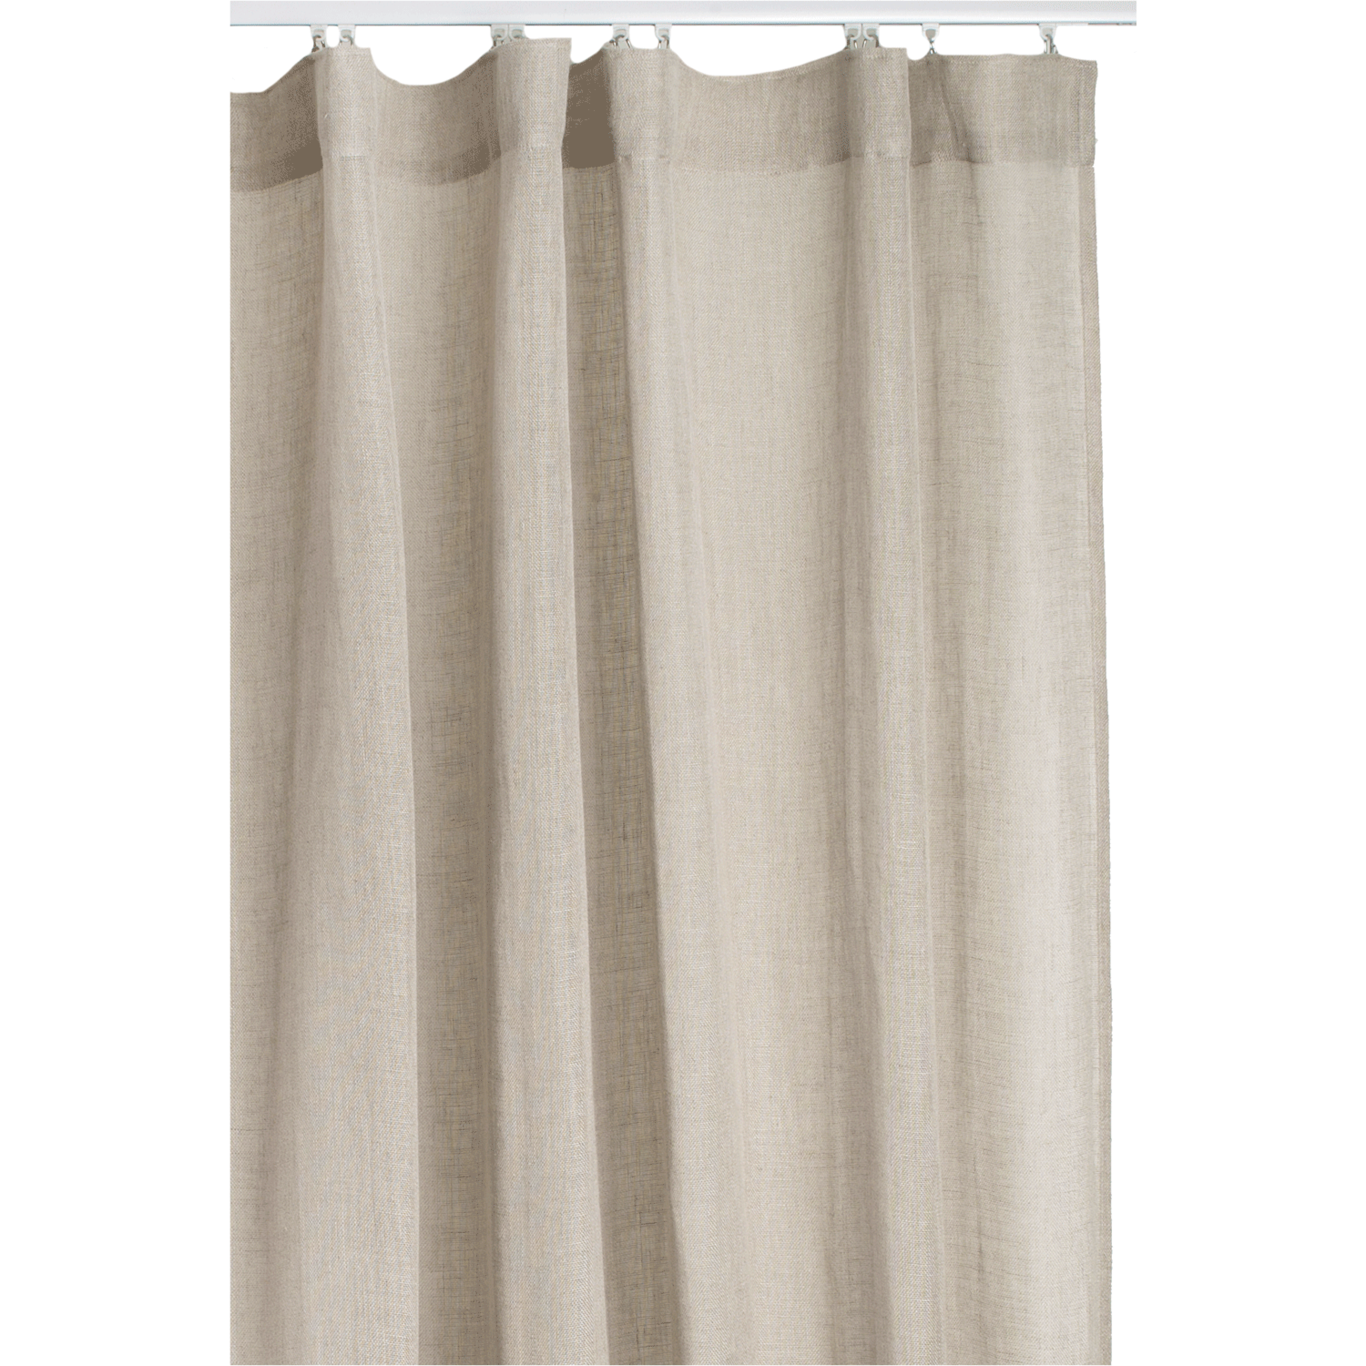 Sirocco Curtain With Heading Tape 135x250 cm, Natural